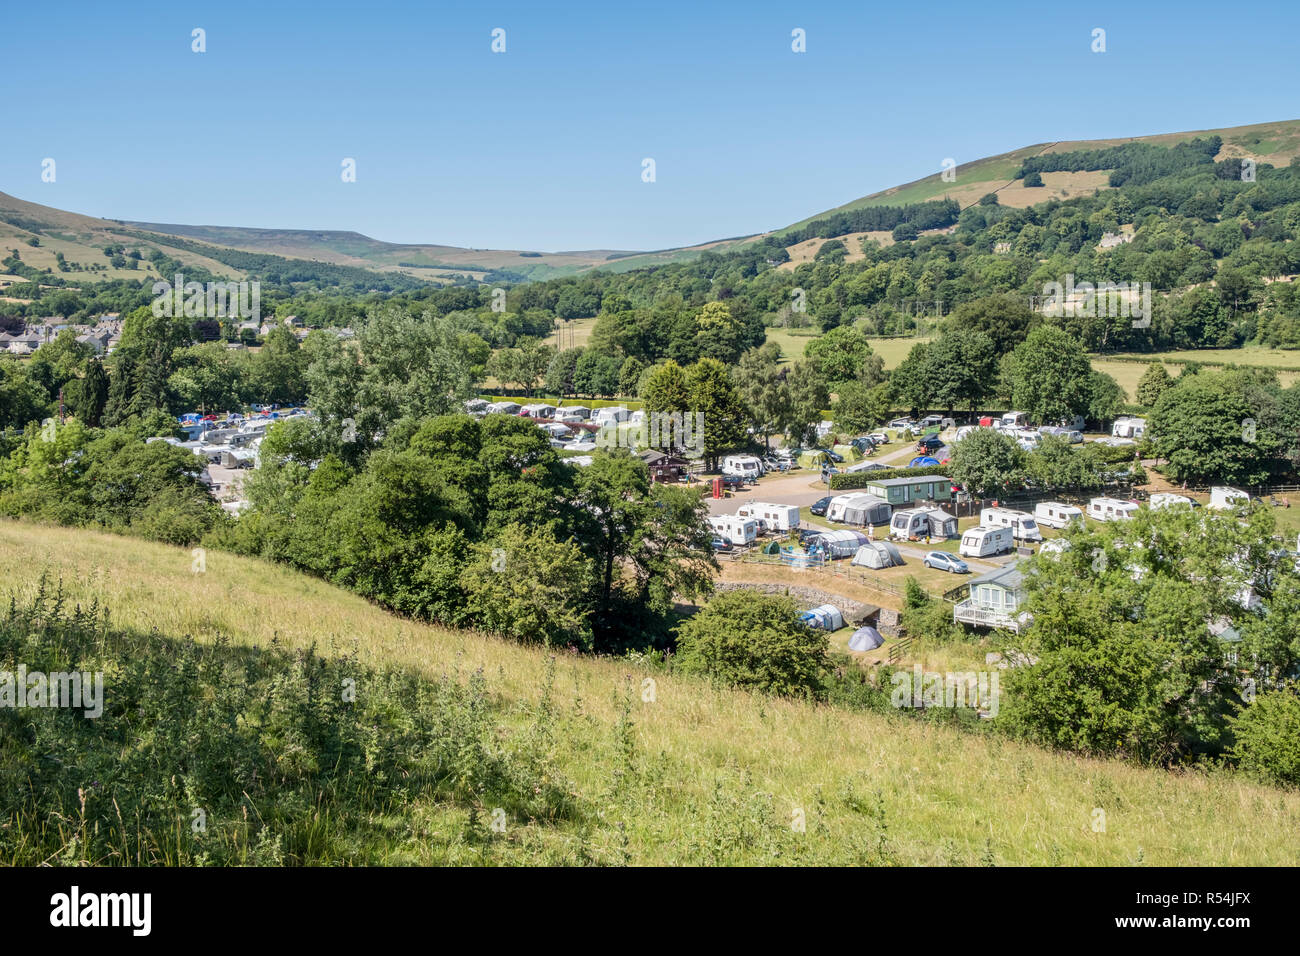 Caravan park in Summer with caravans among the hills and trees of the countryside near Hope, Derbyshire, Peak District National Park, England, UK Stock Photo